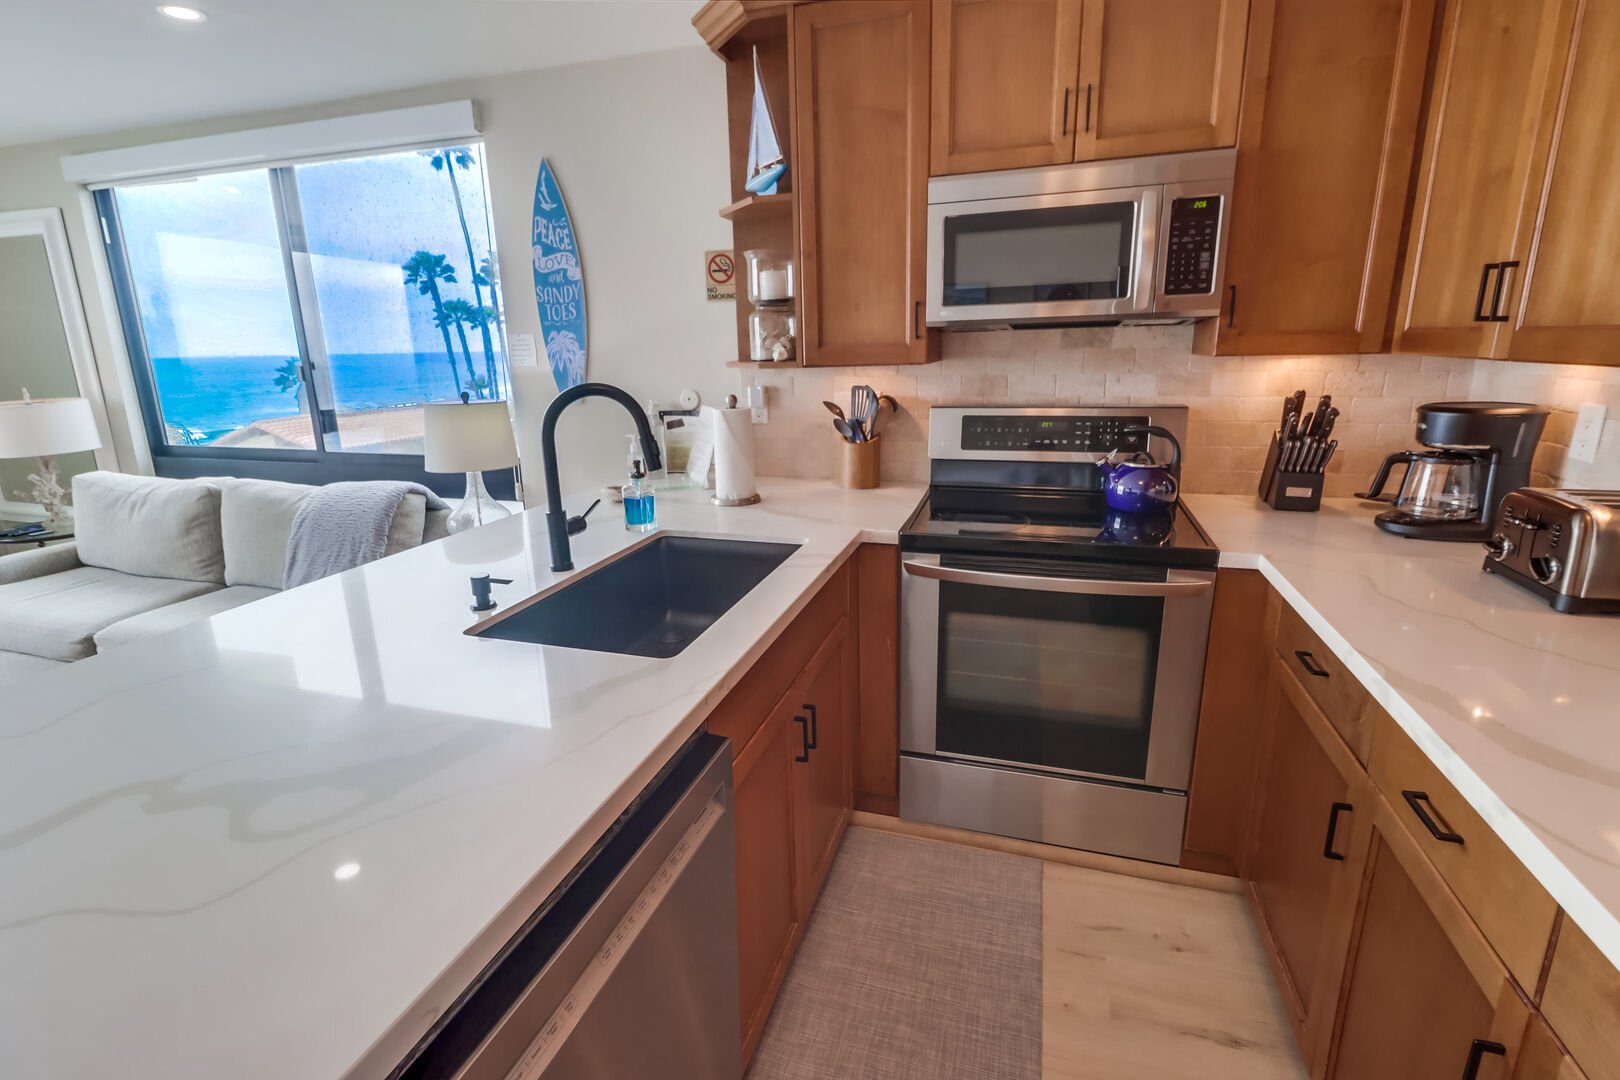 Recently remodeled with new countertops, sink, appliances and flooring!